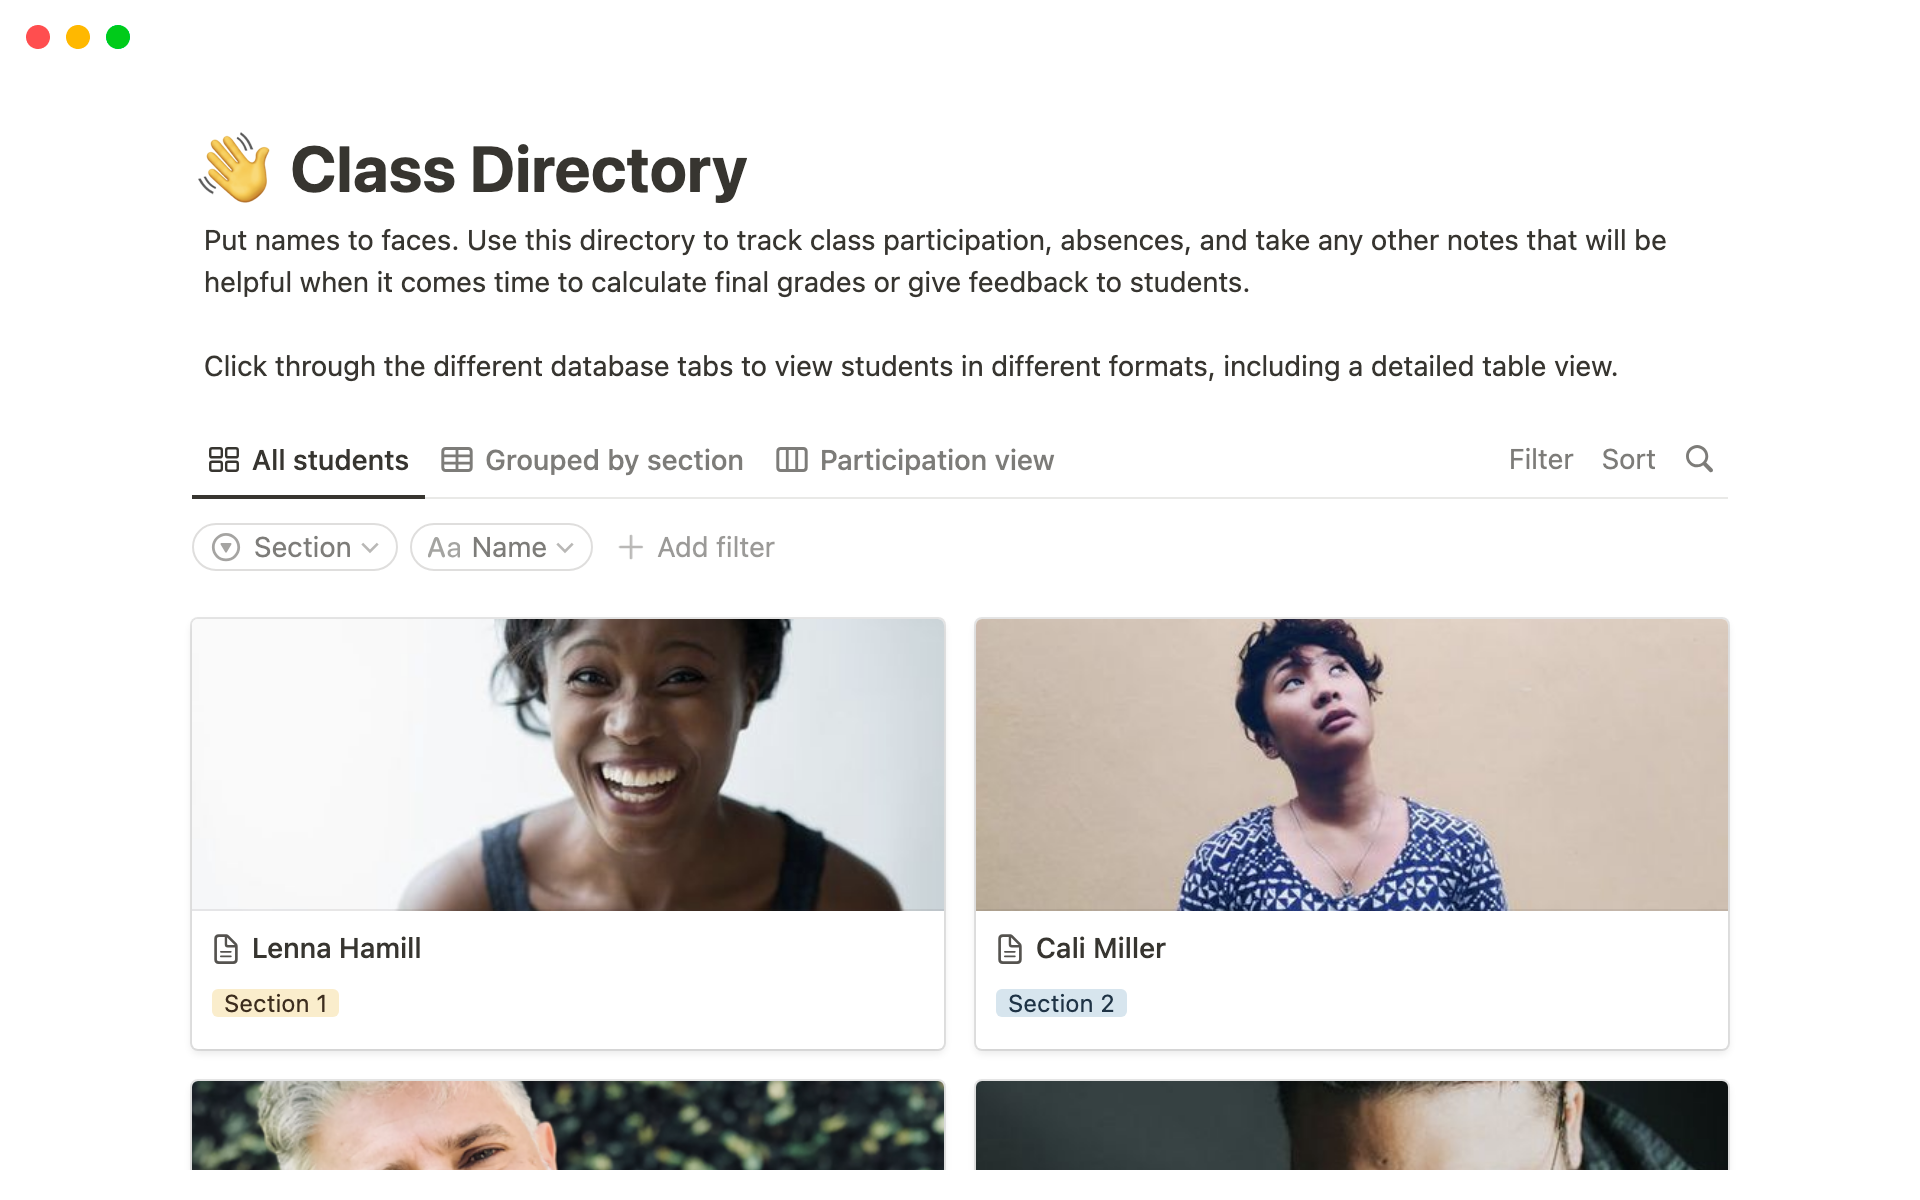 Put names to faces. Use this directory to track class participation, absences, and take any other notes relating to students.